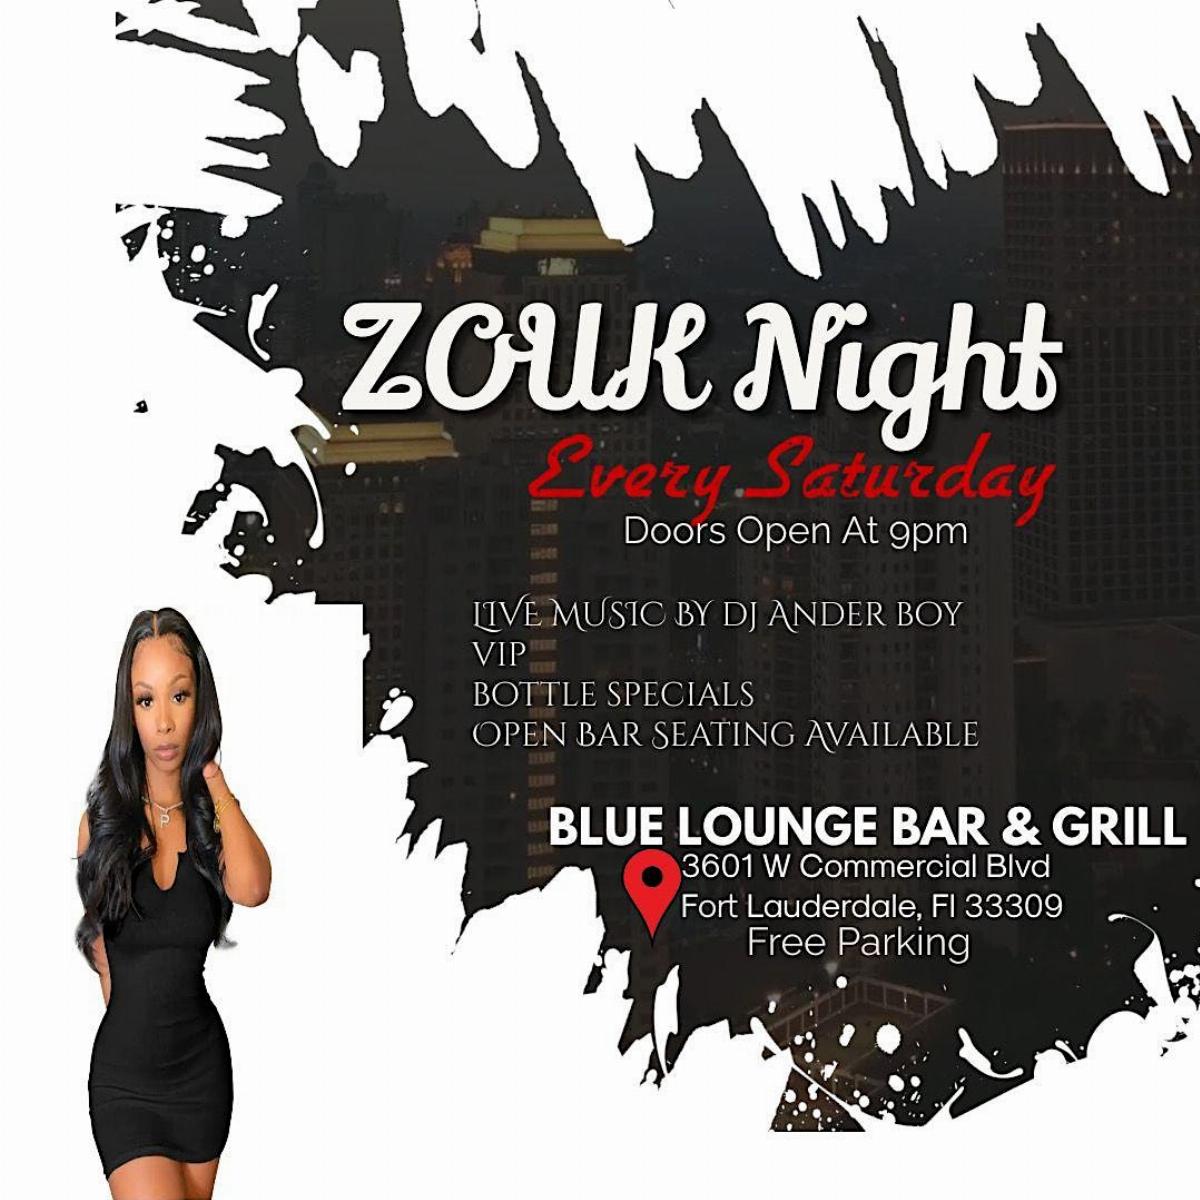 ZOUK NIGHT At Blue Lounge Bar & Grill Every Saturday